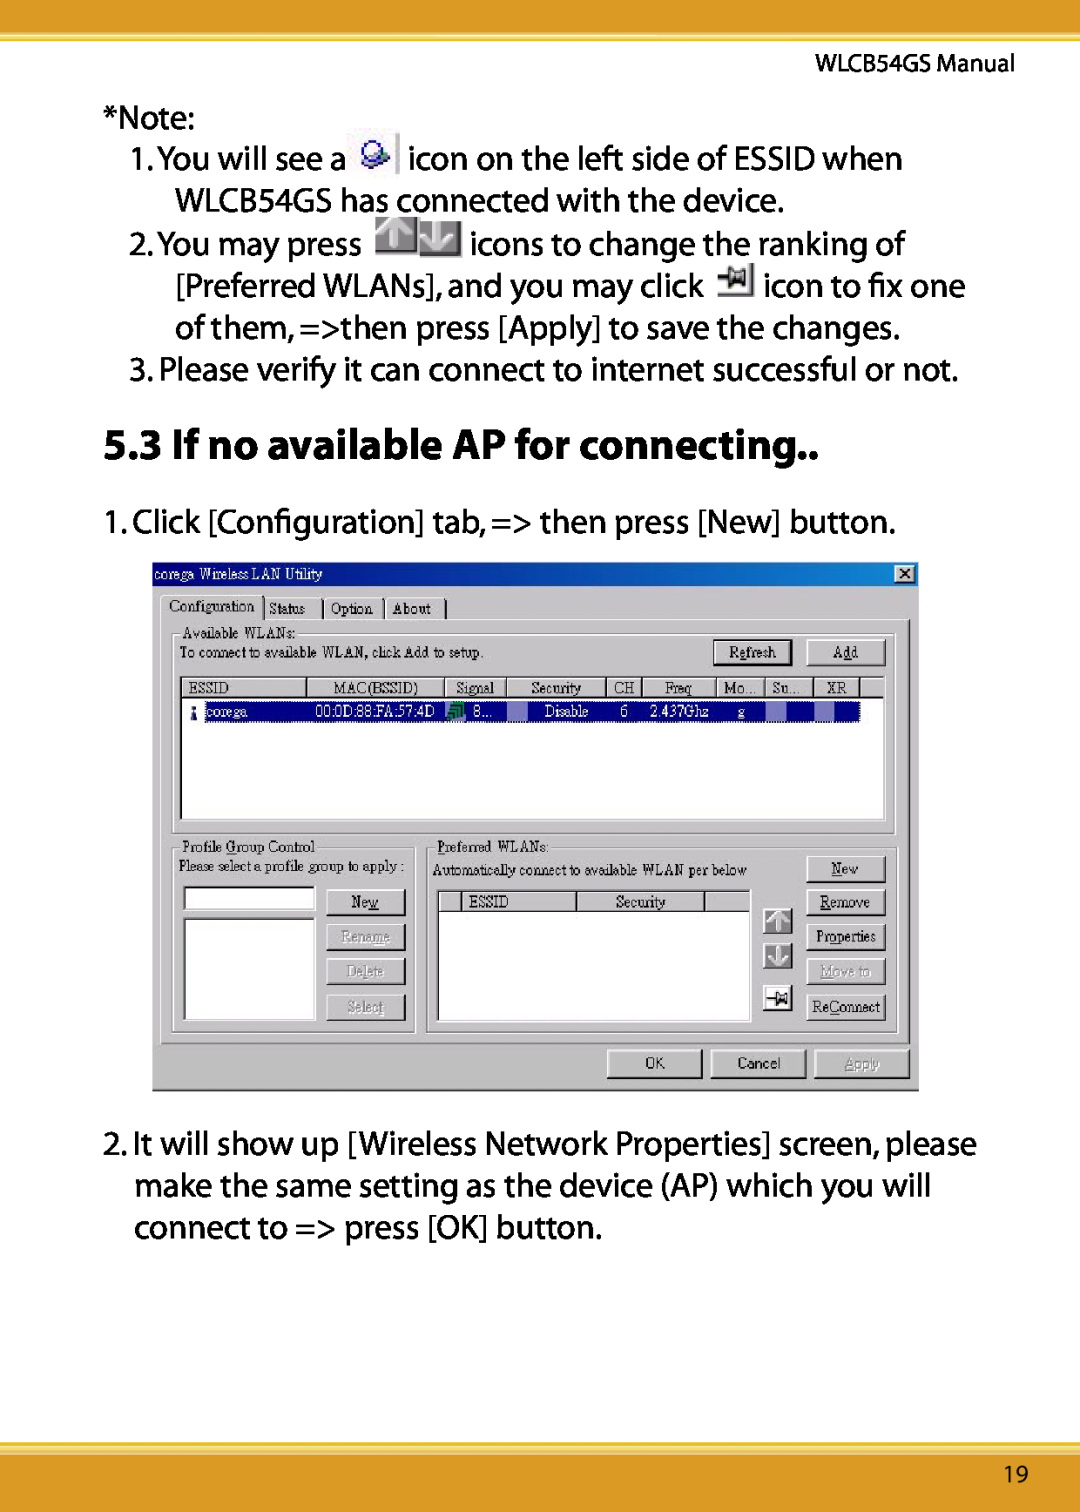 Corega 108M user manual If no available AP for connecting 